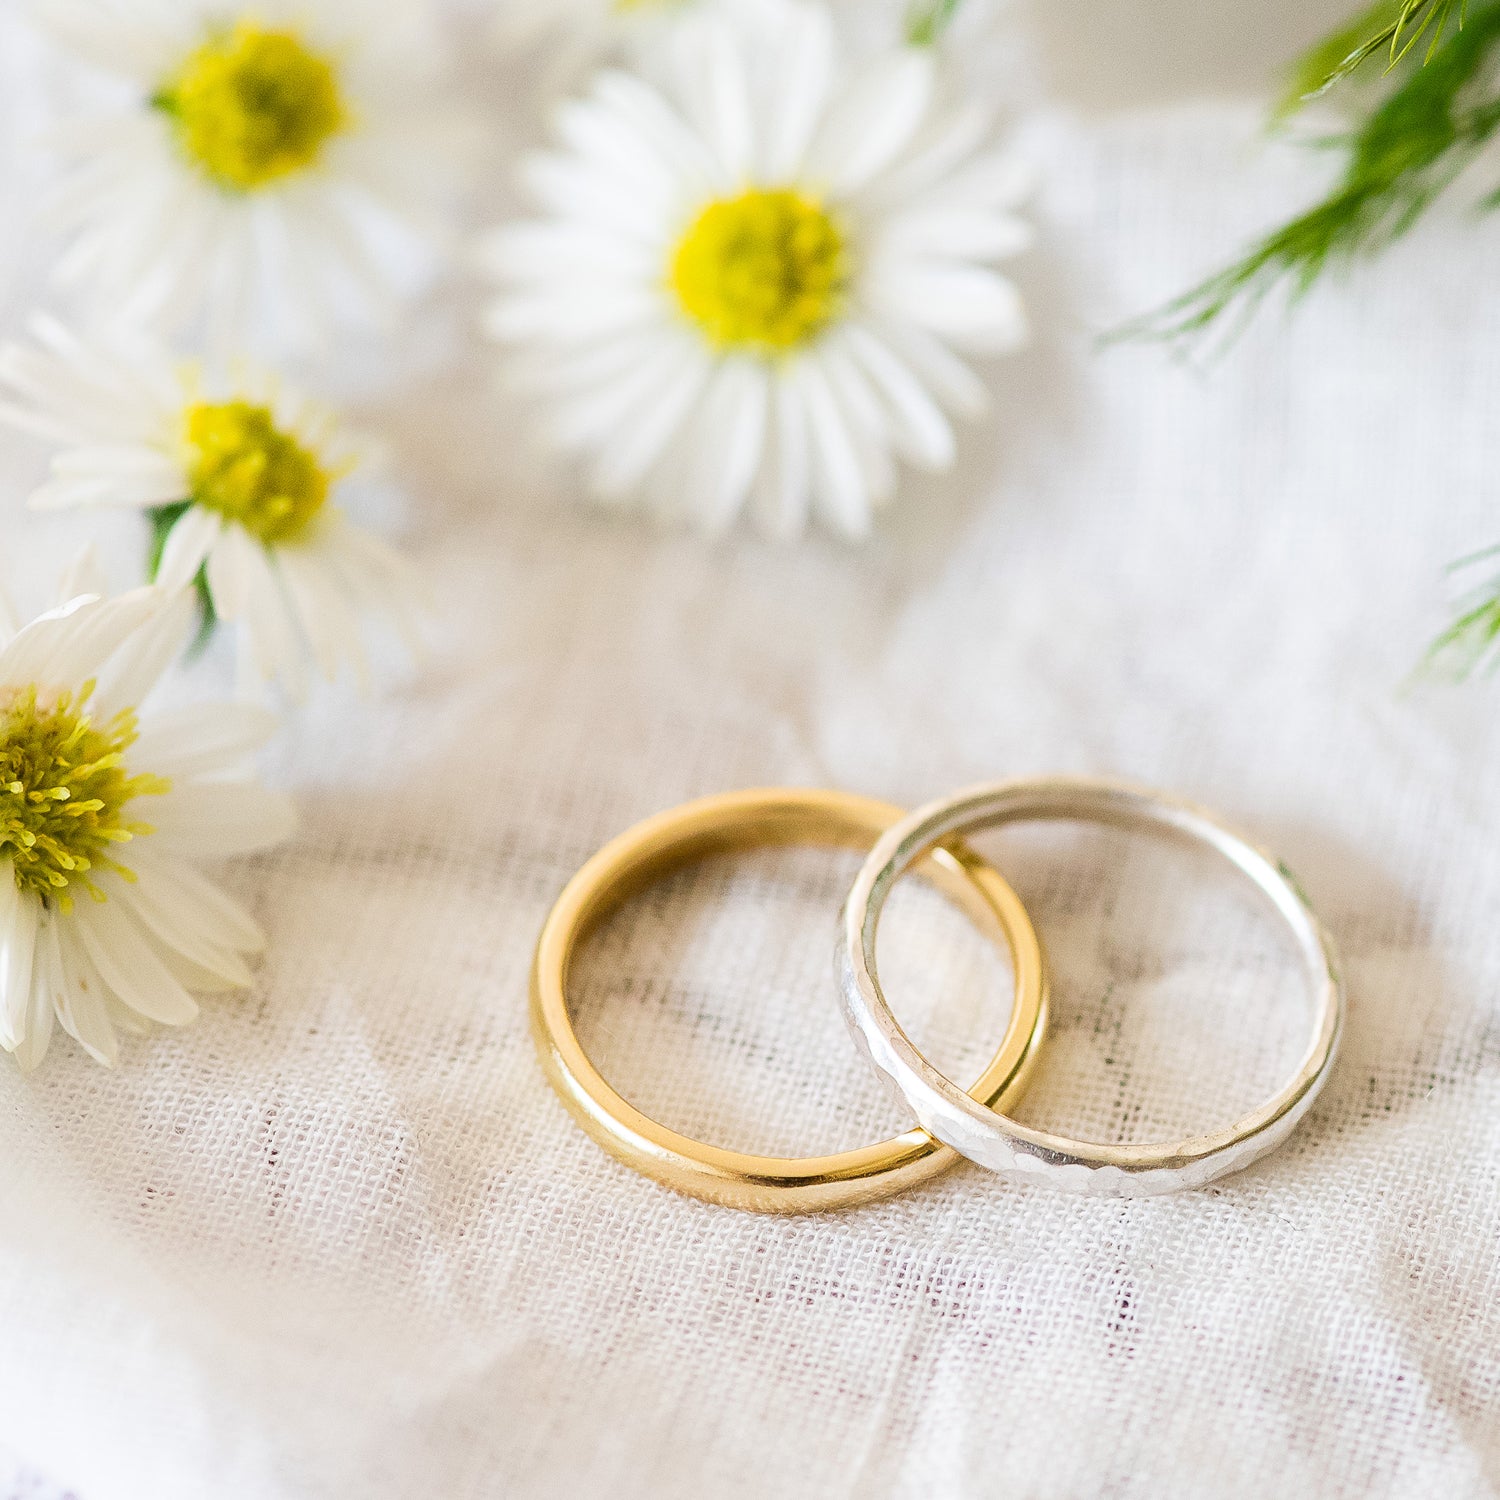 A pair of slim D shaped wedding bands, one 18ct yellow gold one sterling silver, sat on fabric, with some flowers